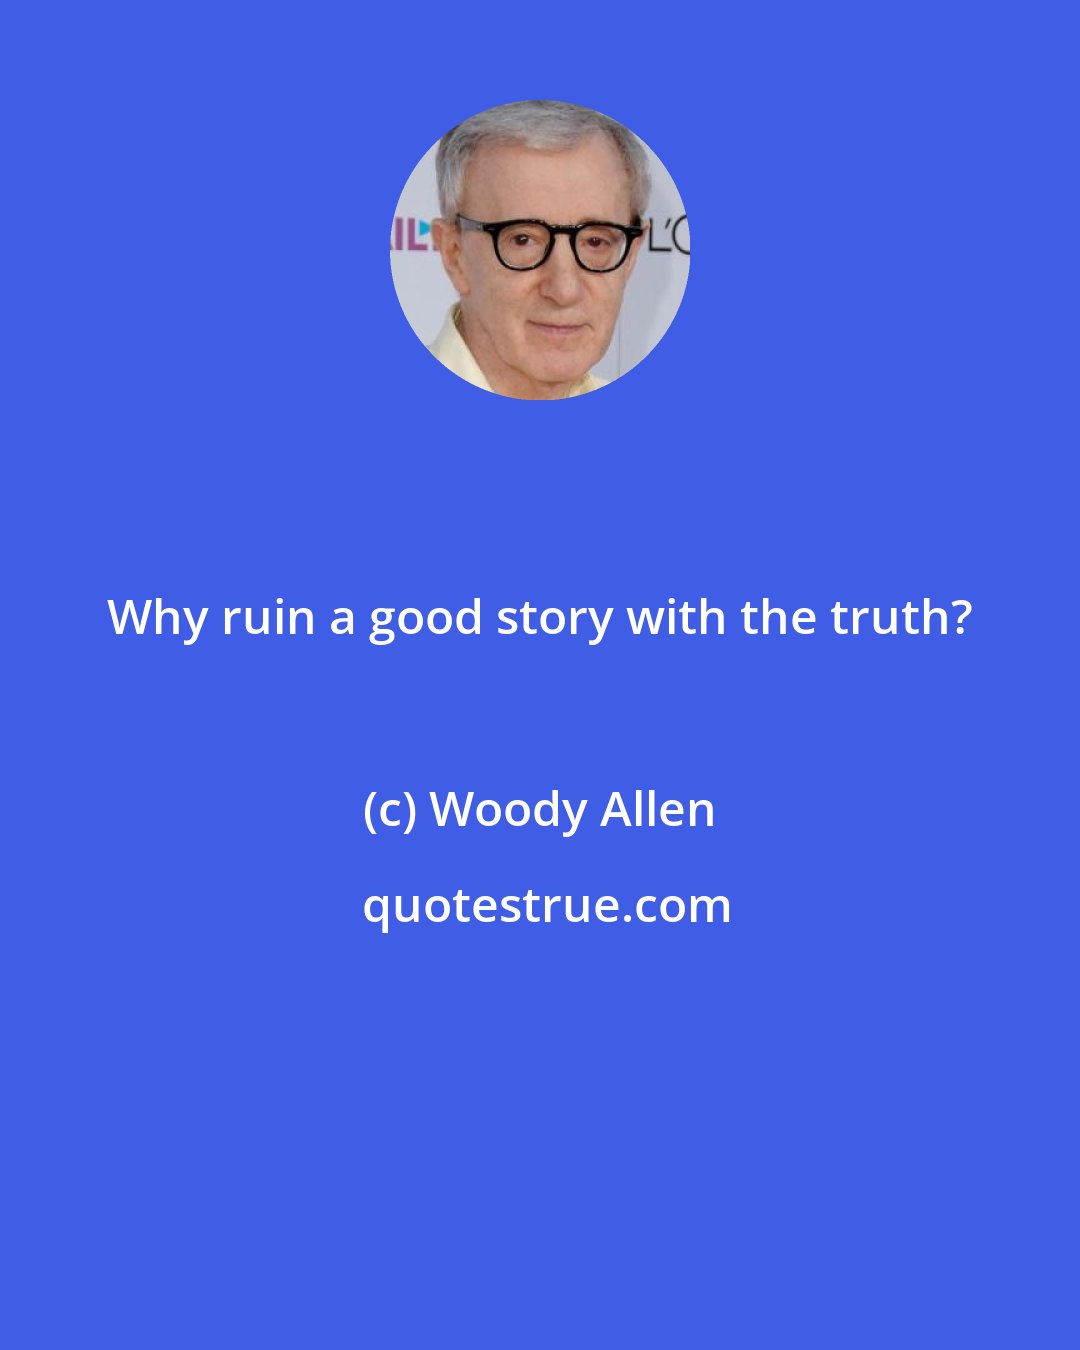 Woody Allen: Why ruin a good story with the truth?